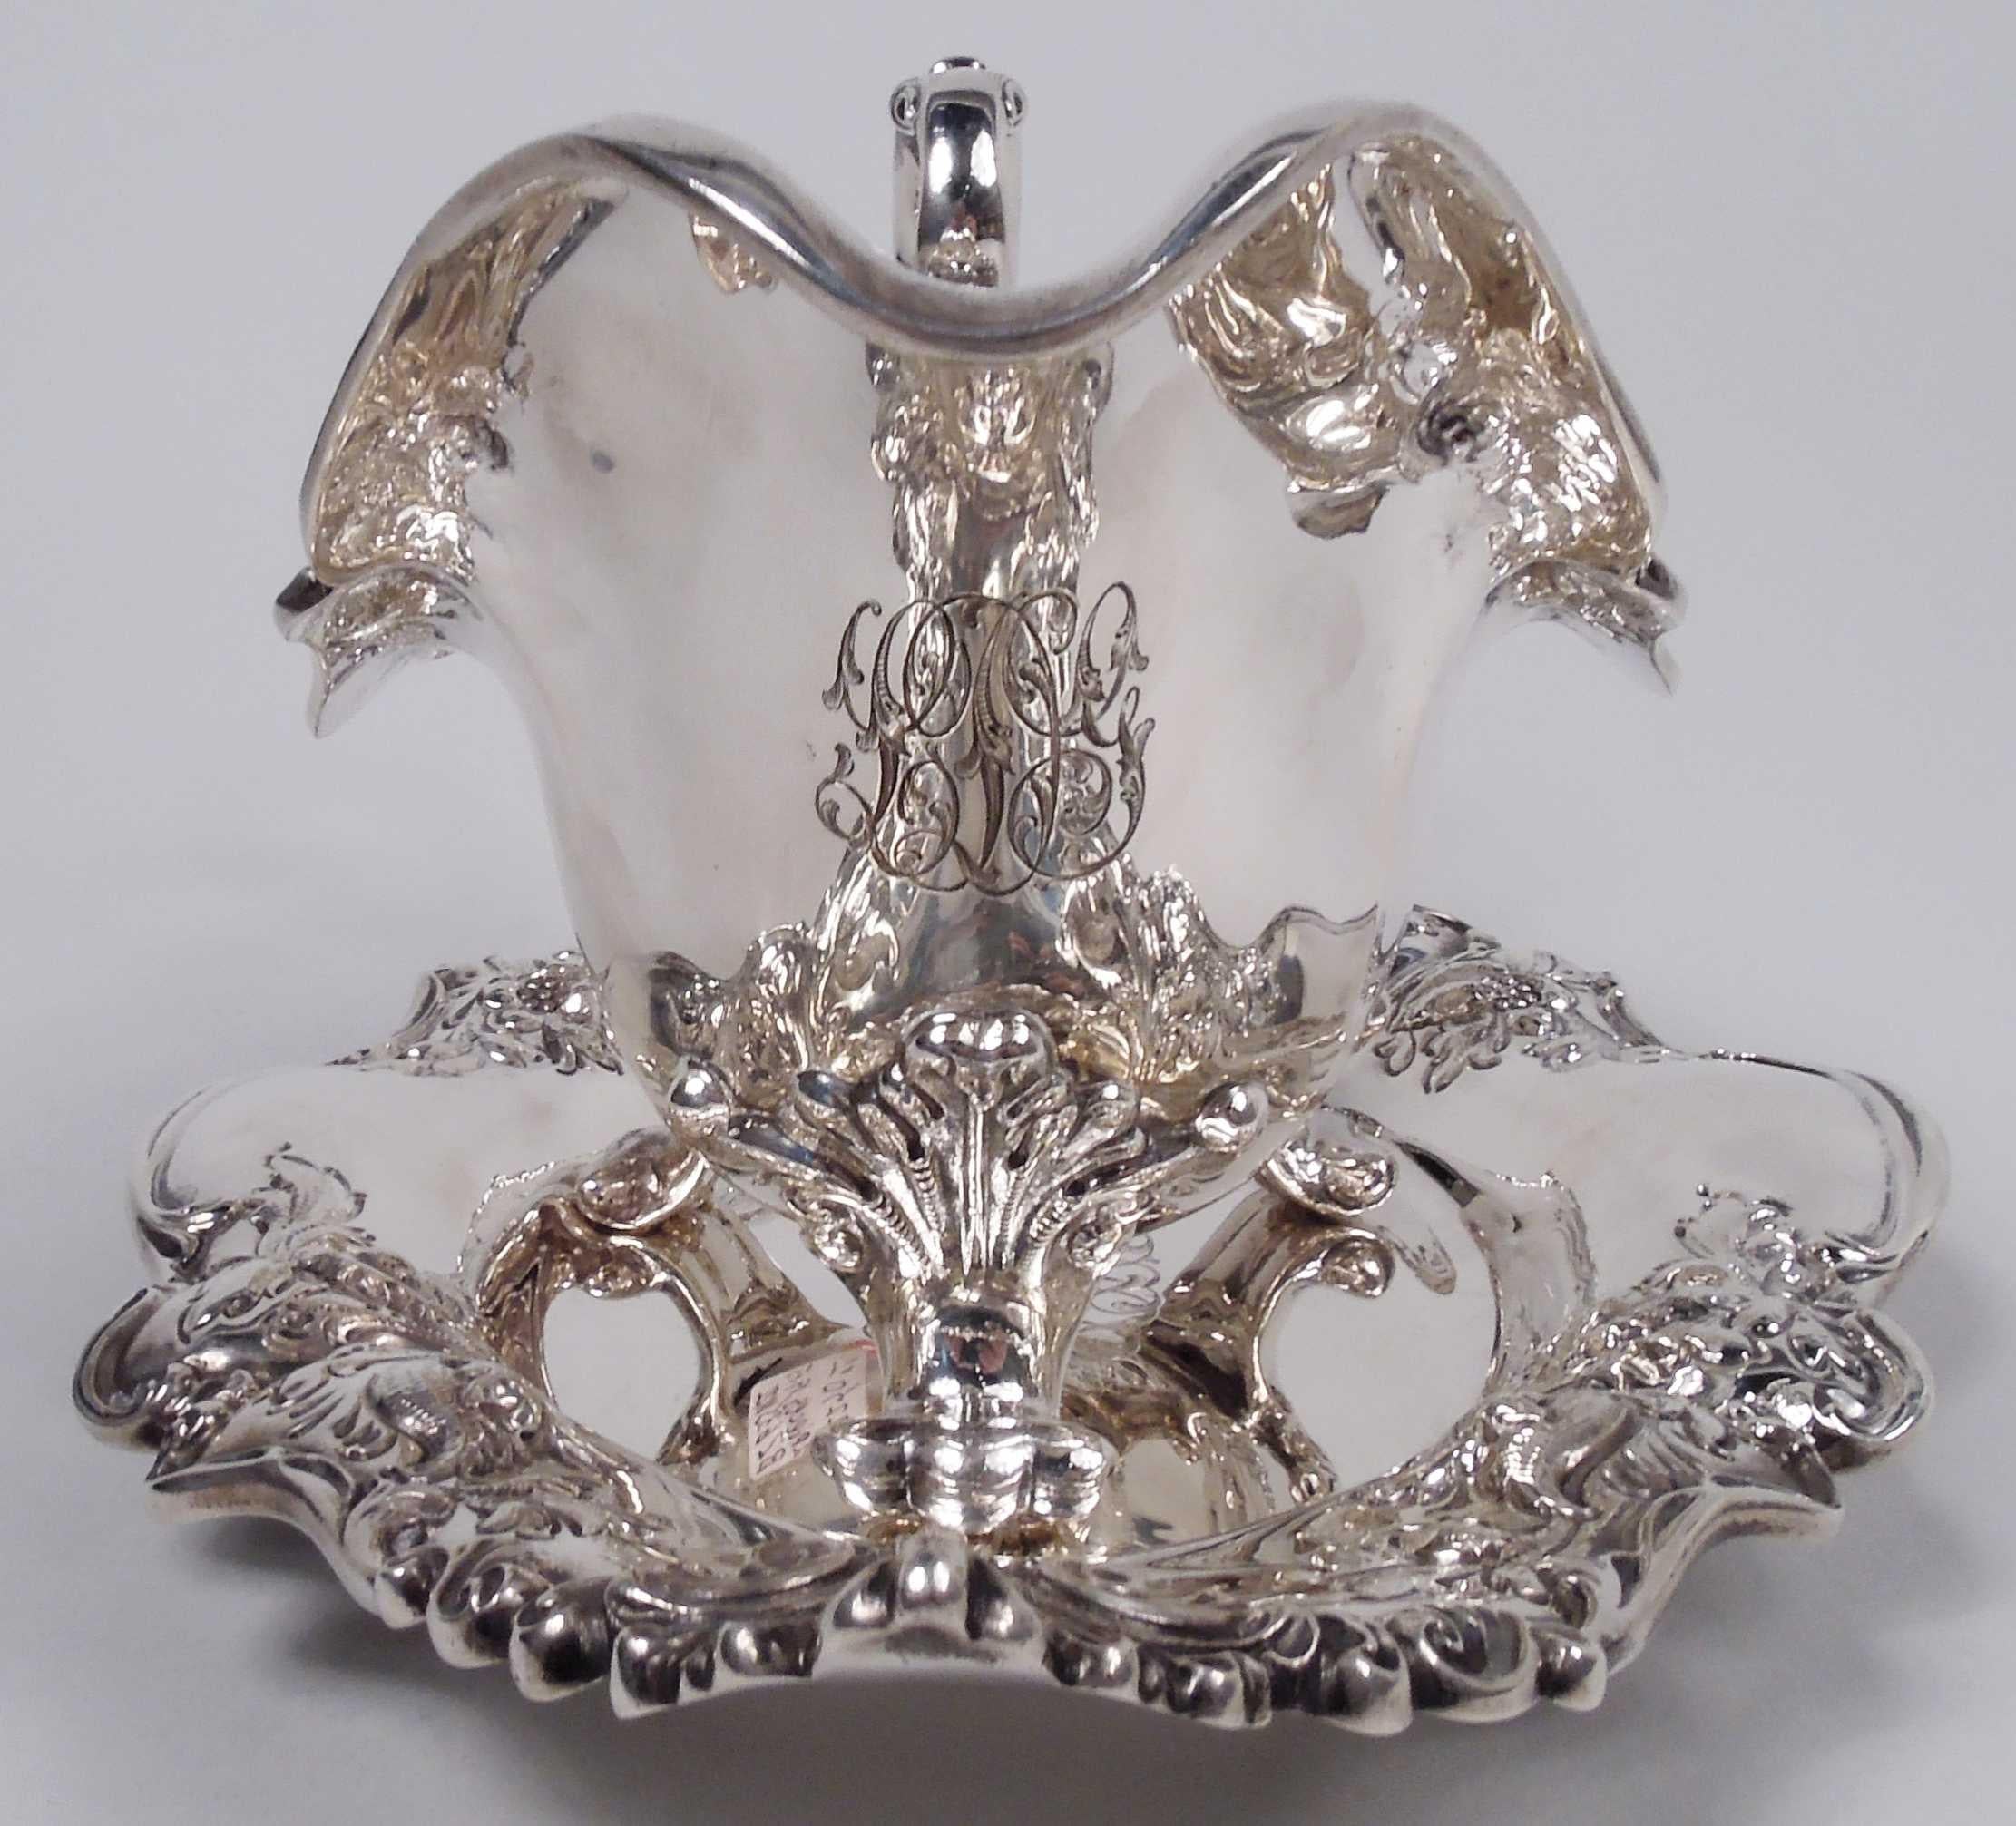 Edwardian Classical sterling silver gravy boat on stand. Made by Dominick & Haff in New York in 1907. Boat has helmet mouth, leaf-capped high-looping handle, and 3 leaf-mounted scroll supports. Stand has oval well. Turned-down and irregular scrolled